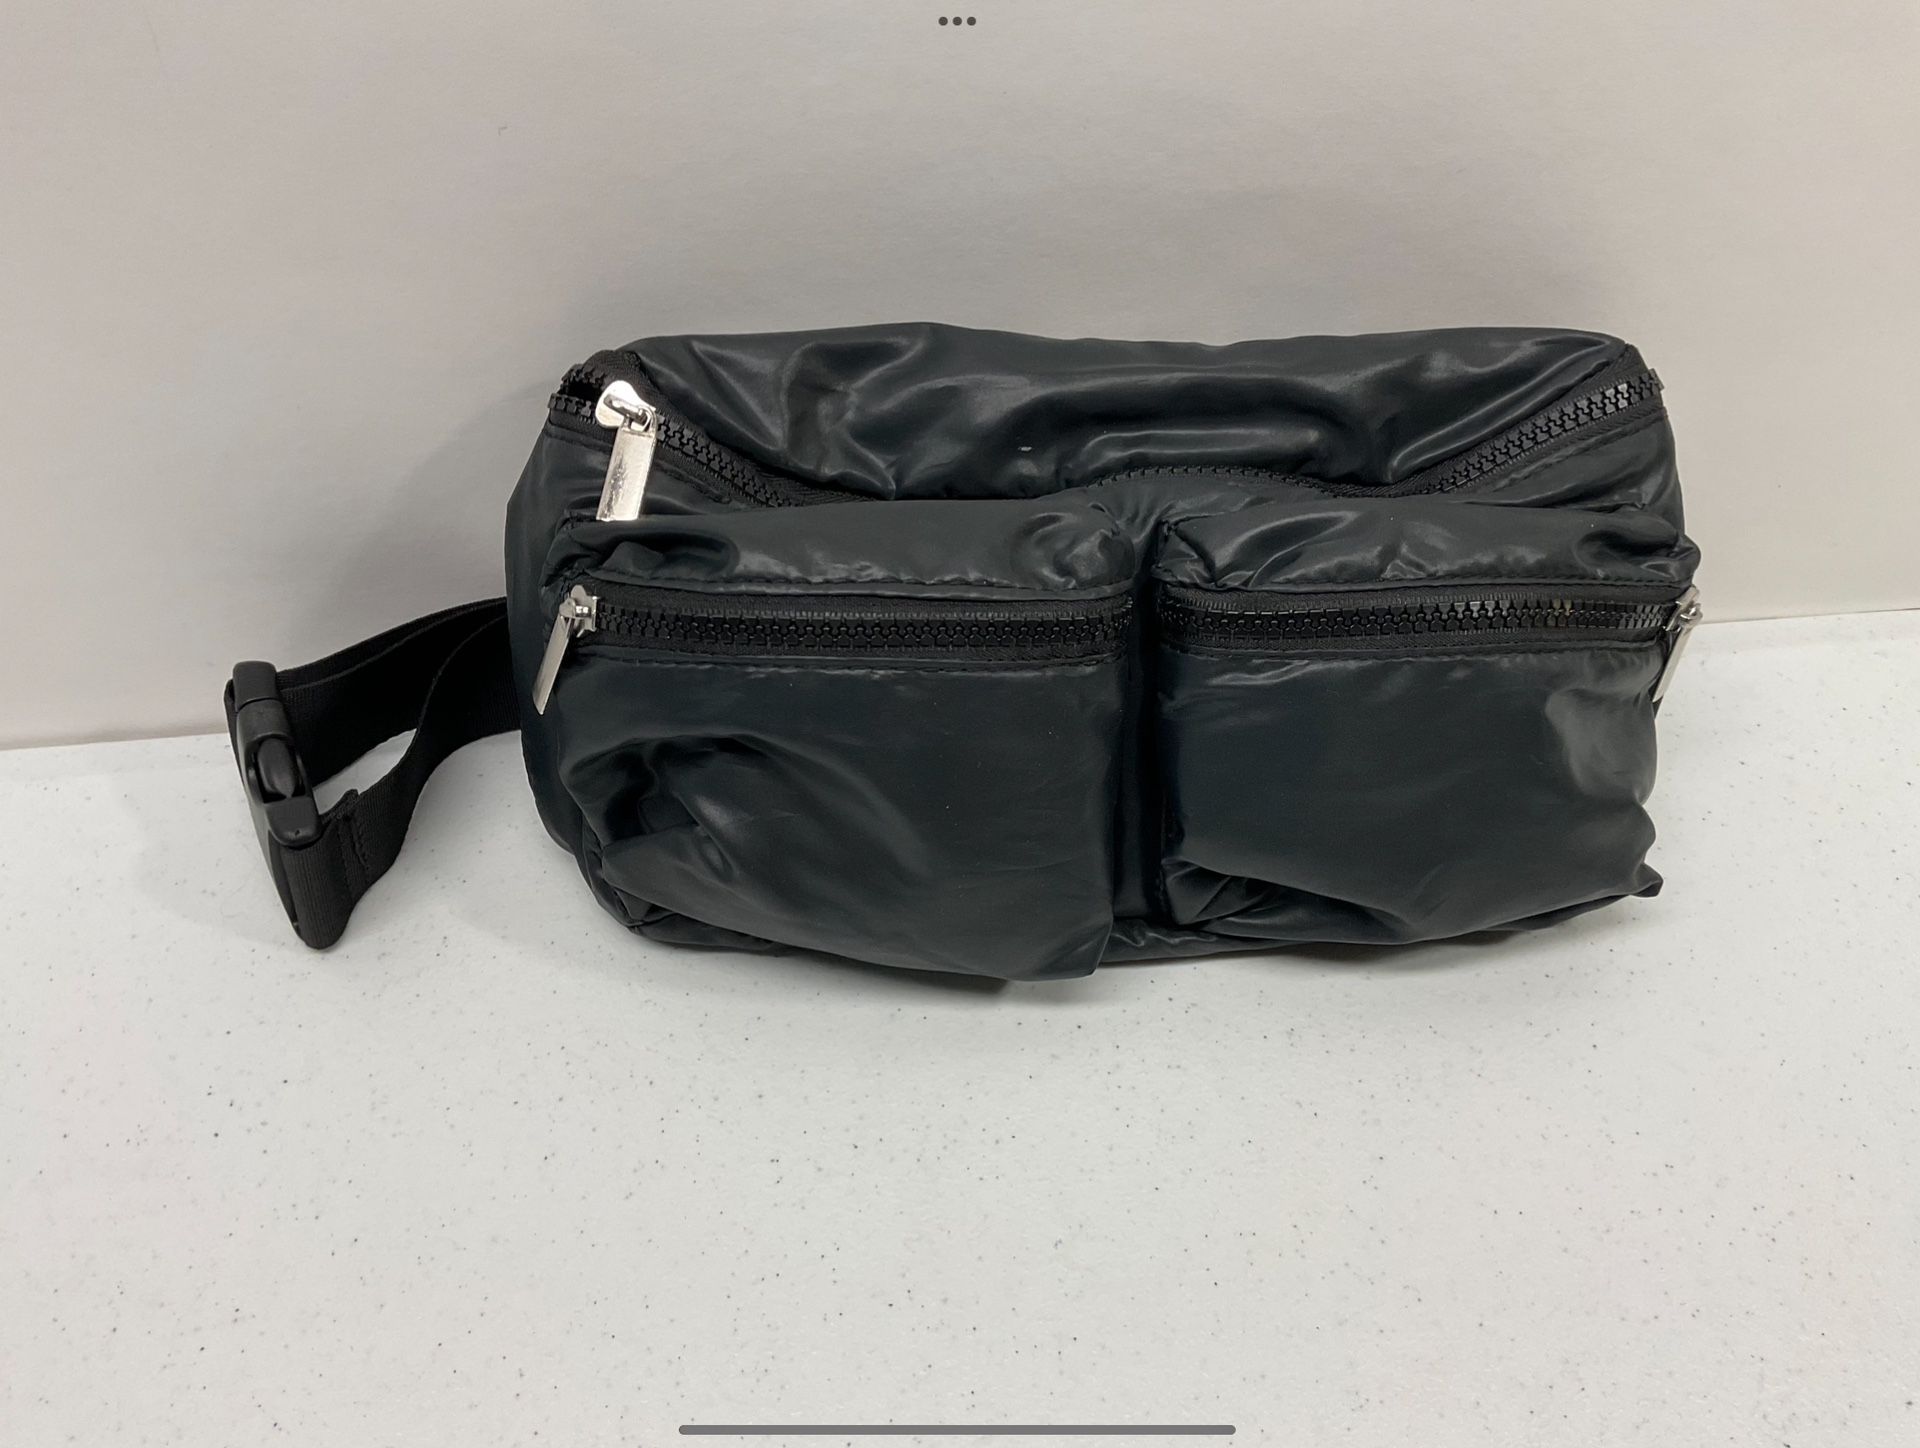 NEW Without Tags Black Belt Bag. Sizing In Pictures